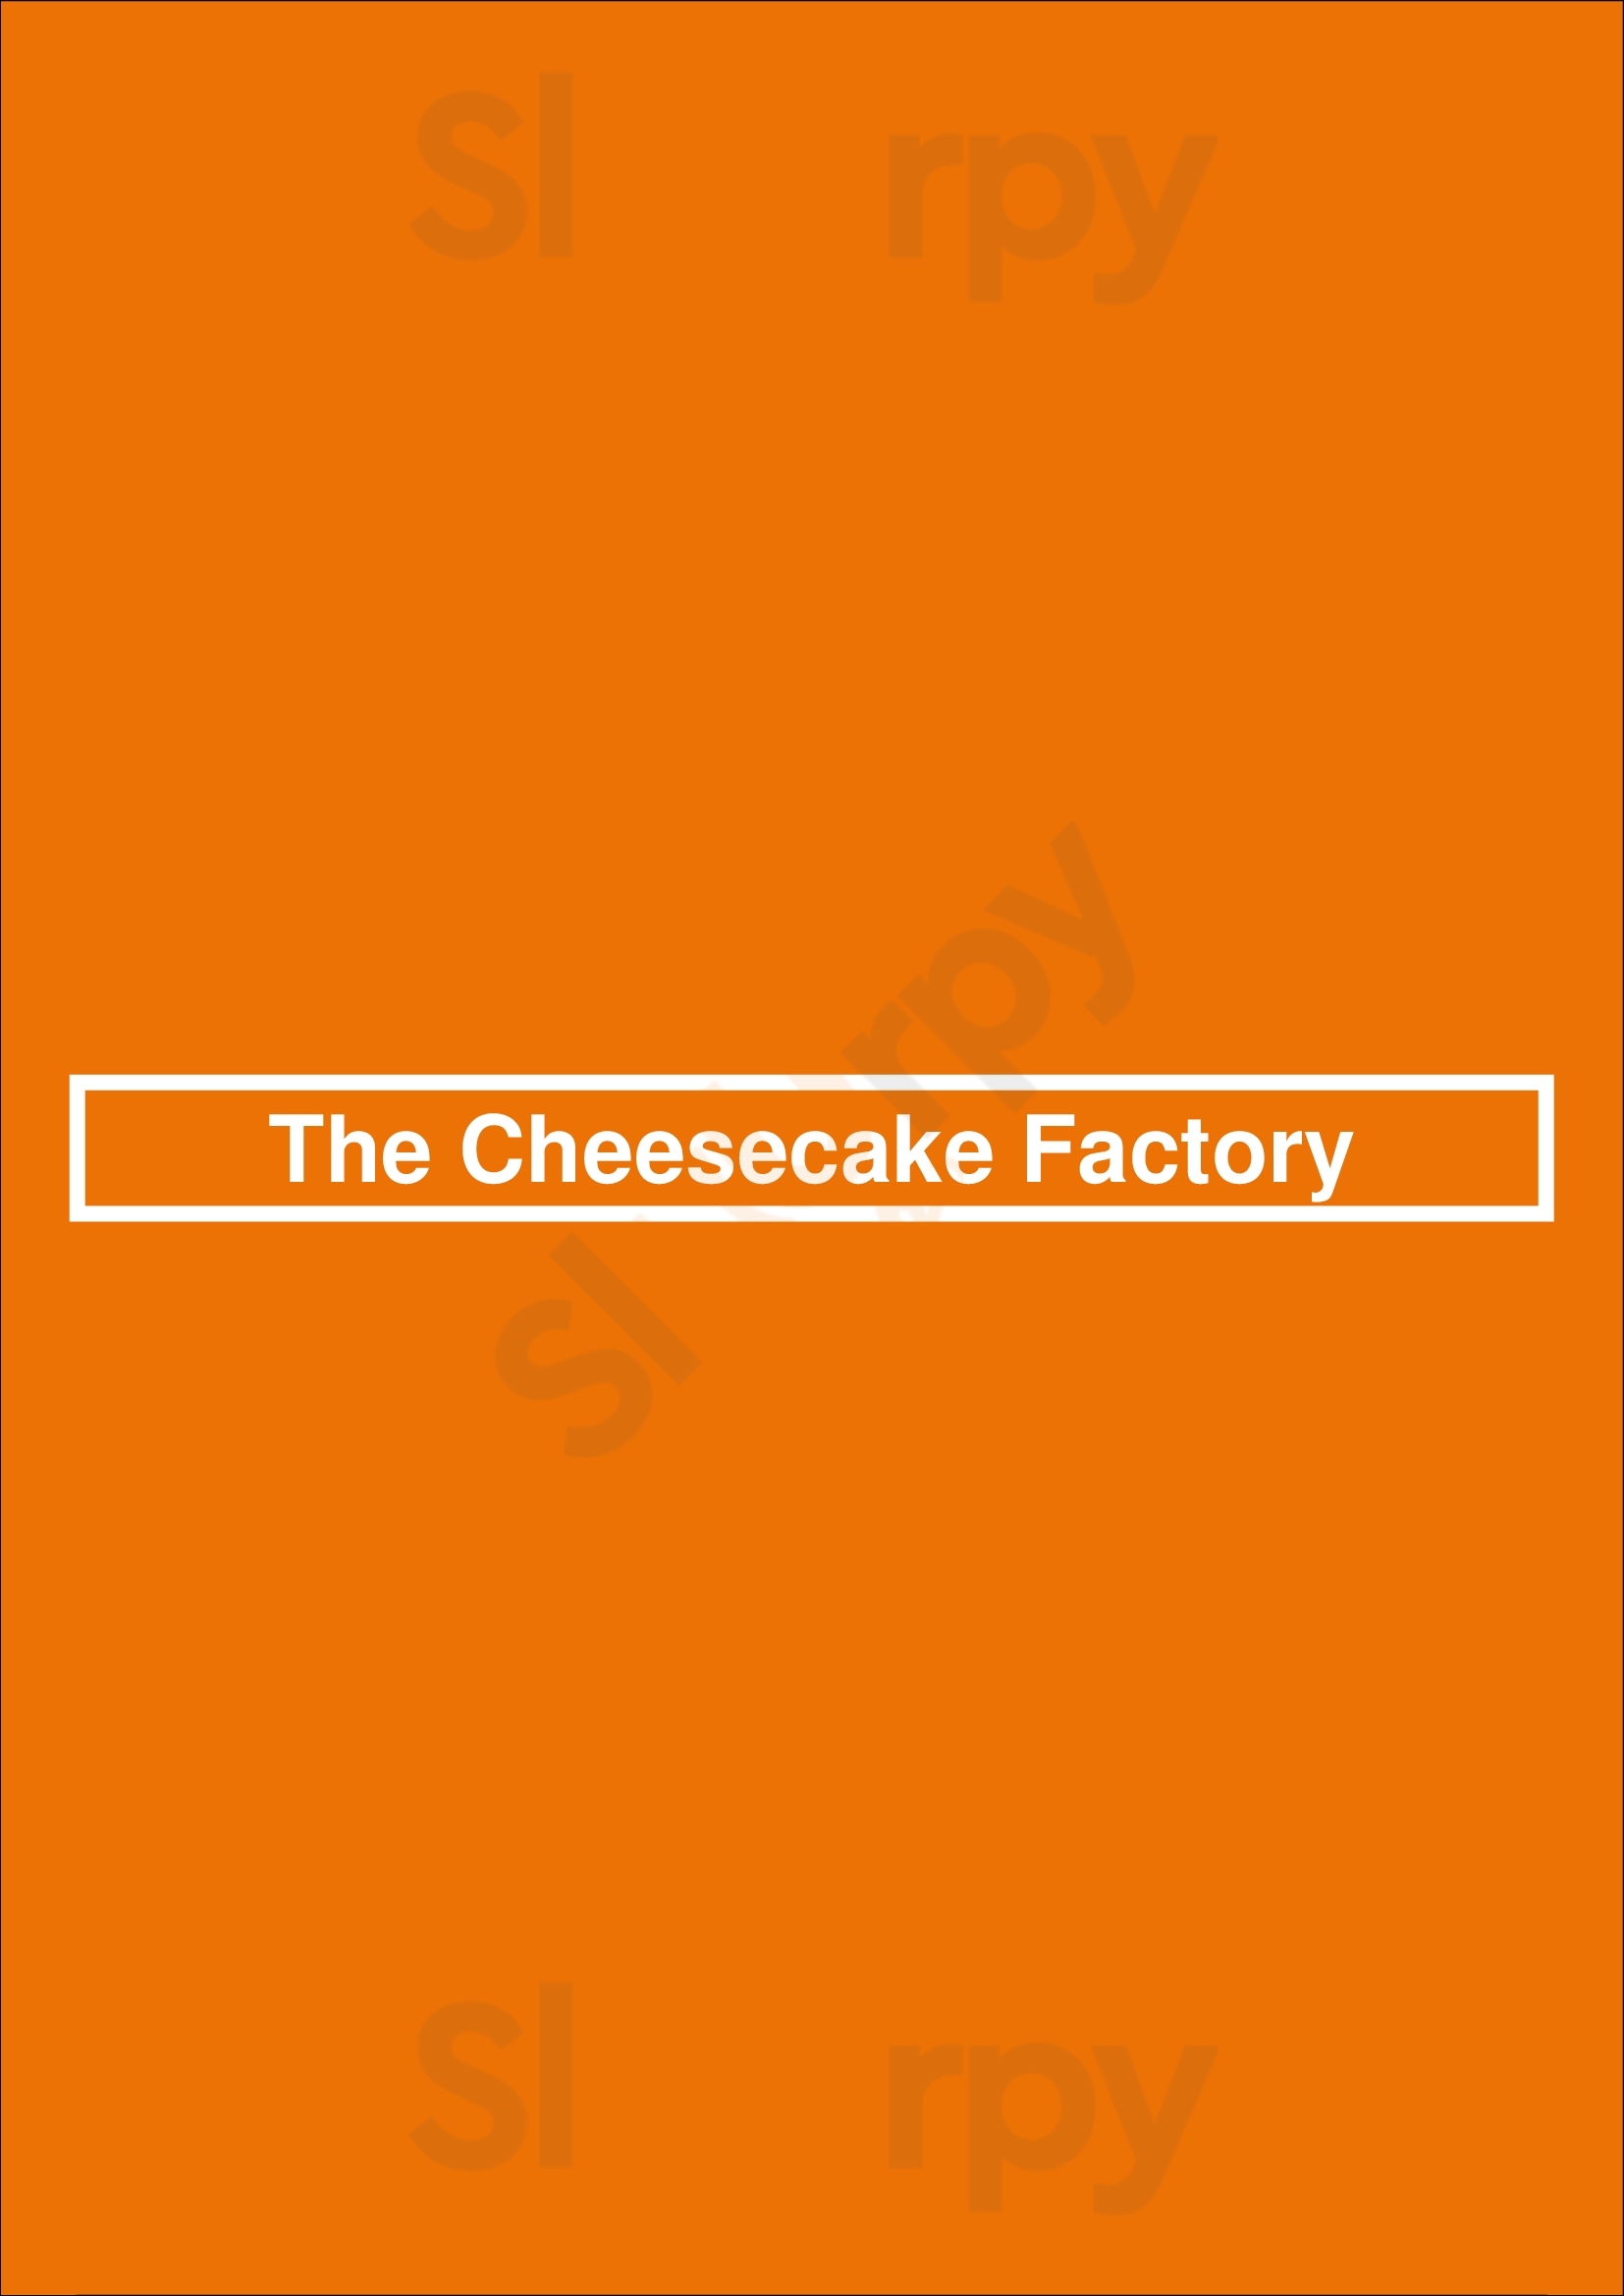 The Cheesecake Factory Chicago Menu - 1